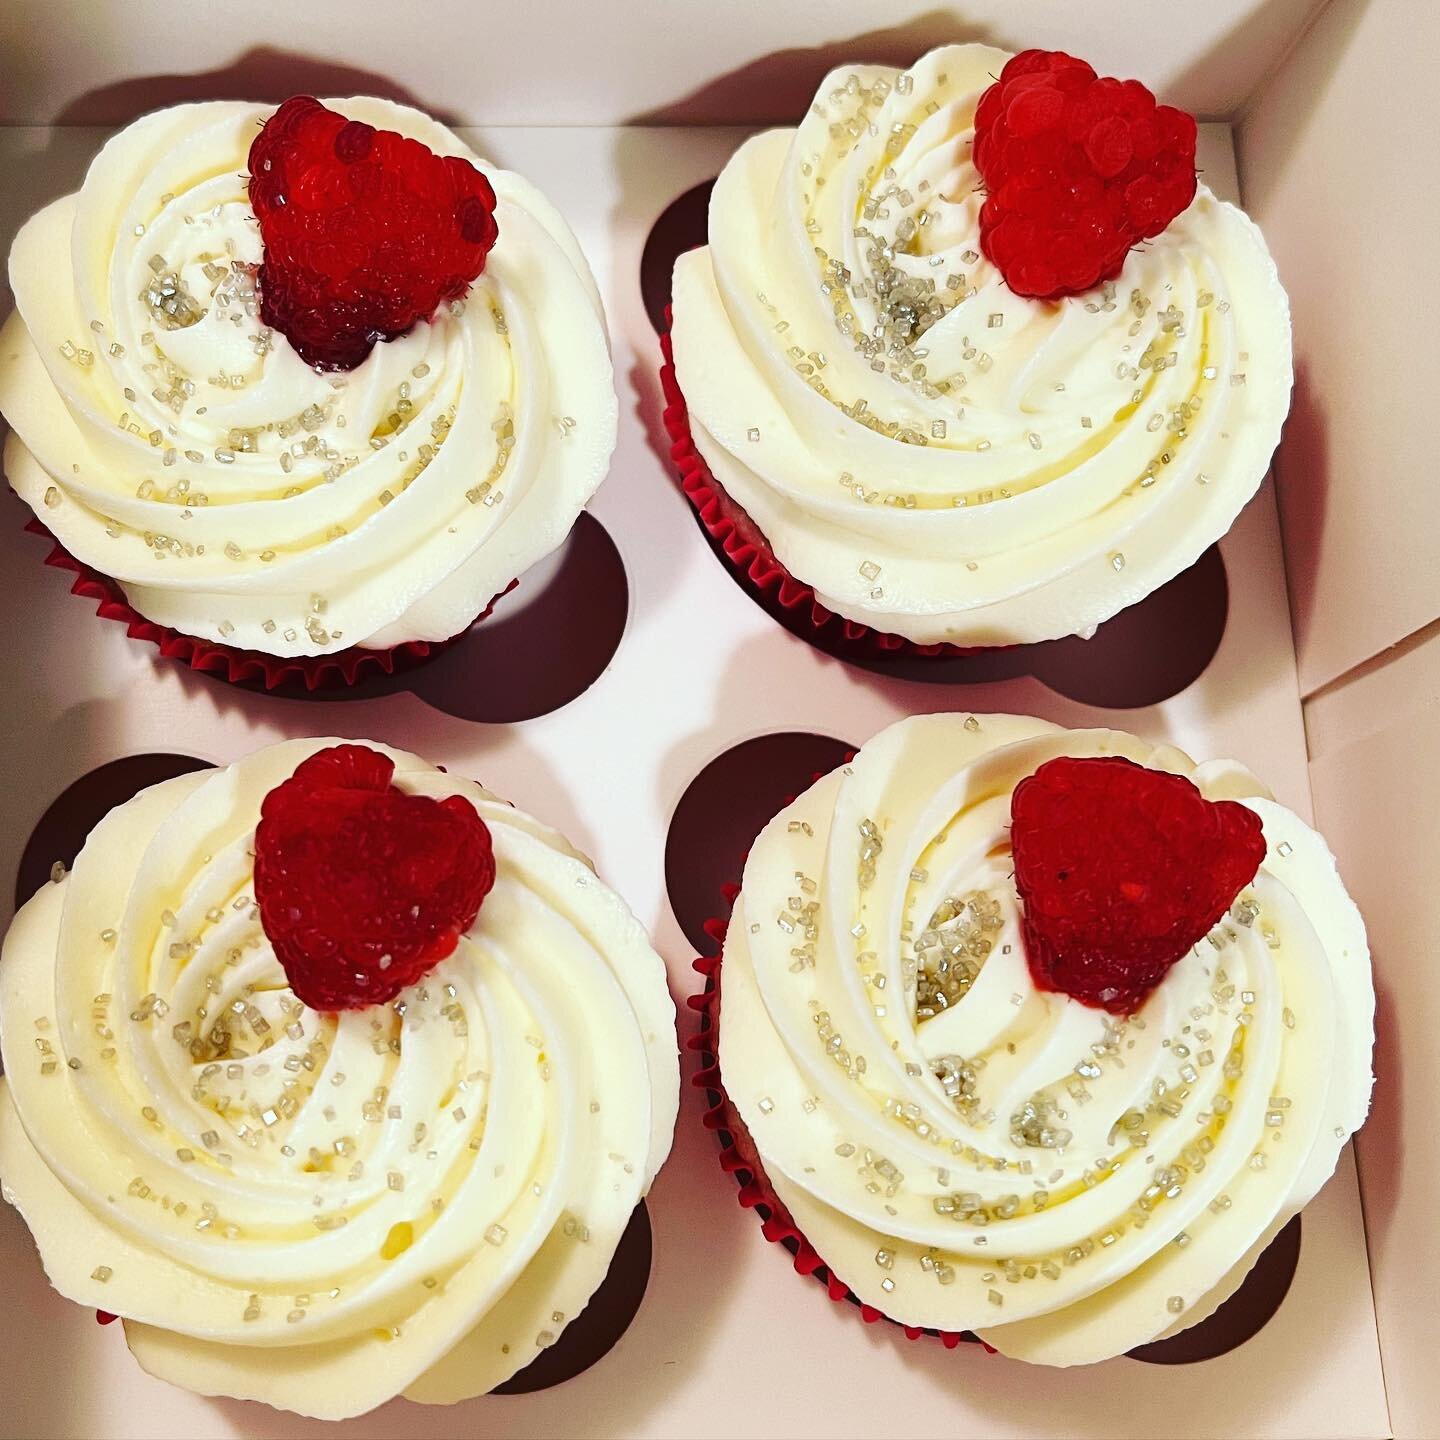 Raspberry Cupcakes with White Chocolate Frosting 
🤍❤️🤍❤️🤍
-
-
-
-
-
#rhbakes #cupcakes #raspberry #raspberrycupcakes #whitechocolate #whitechocolatefrosting #baking #bakingfromscratch #fromscratch #fromscratchbaking #fromscratchwithlove